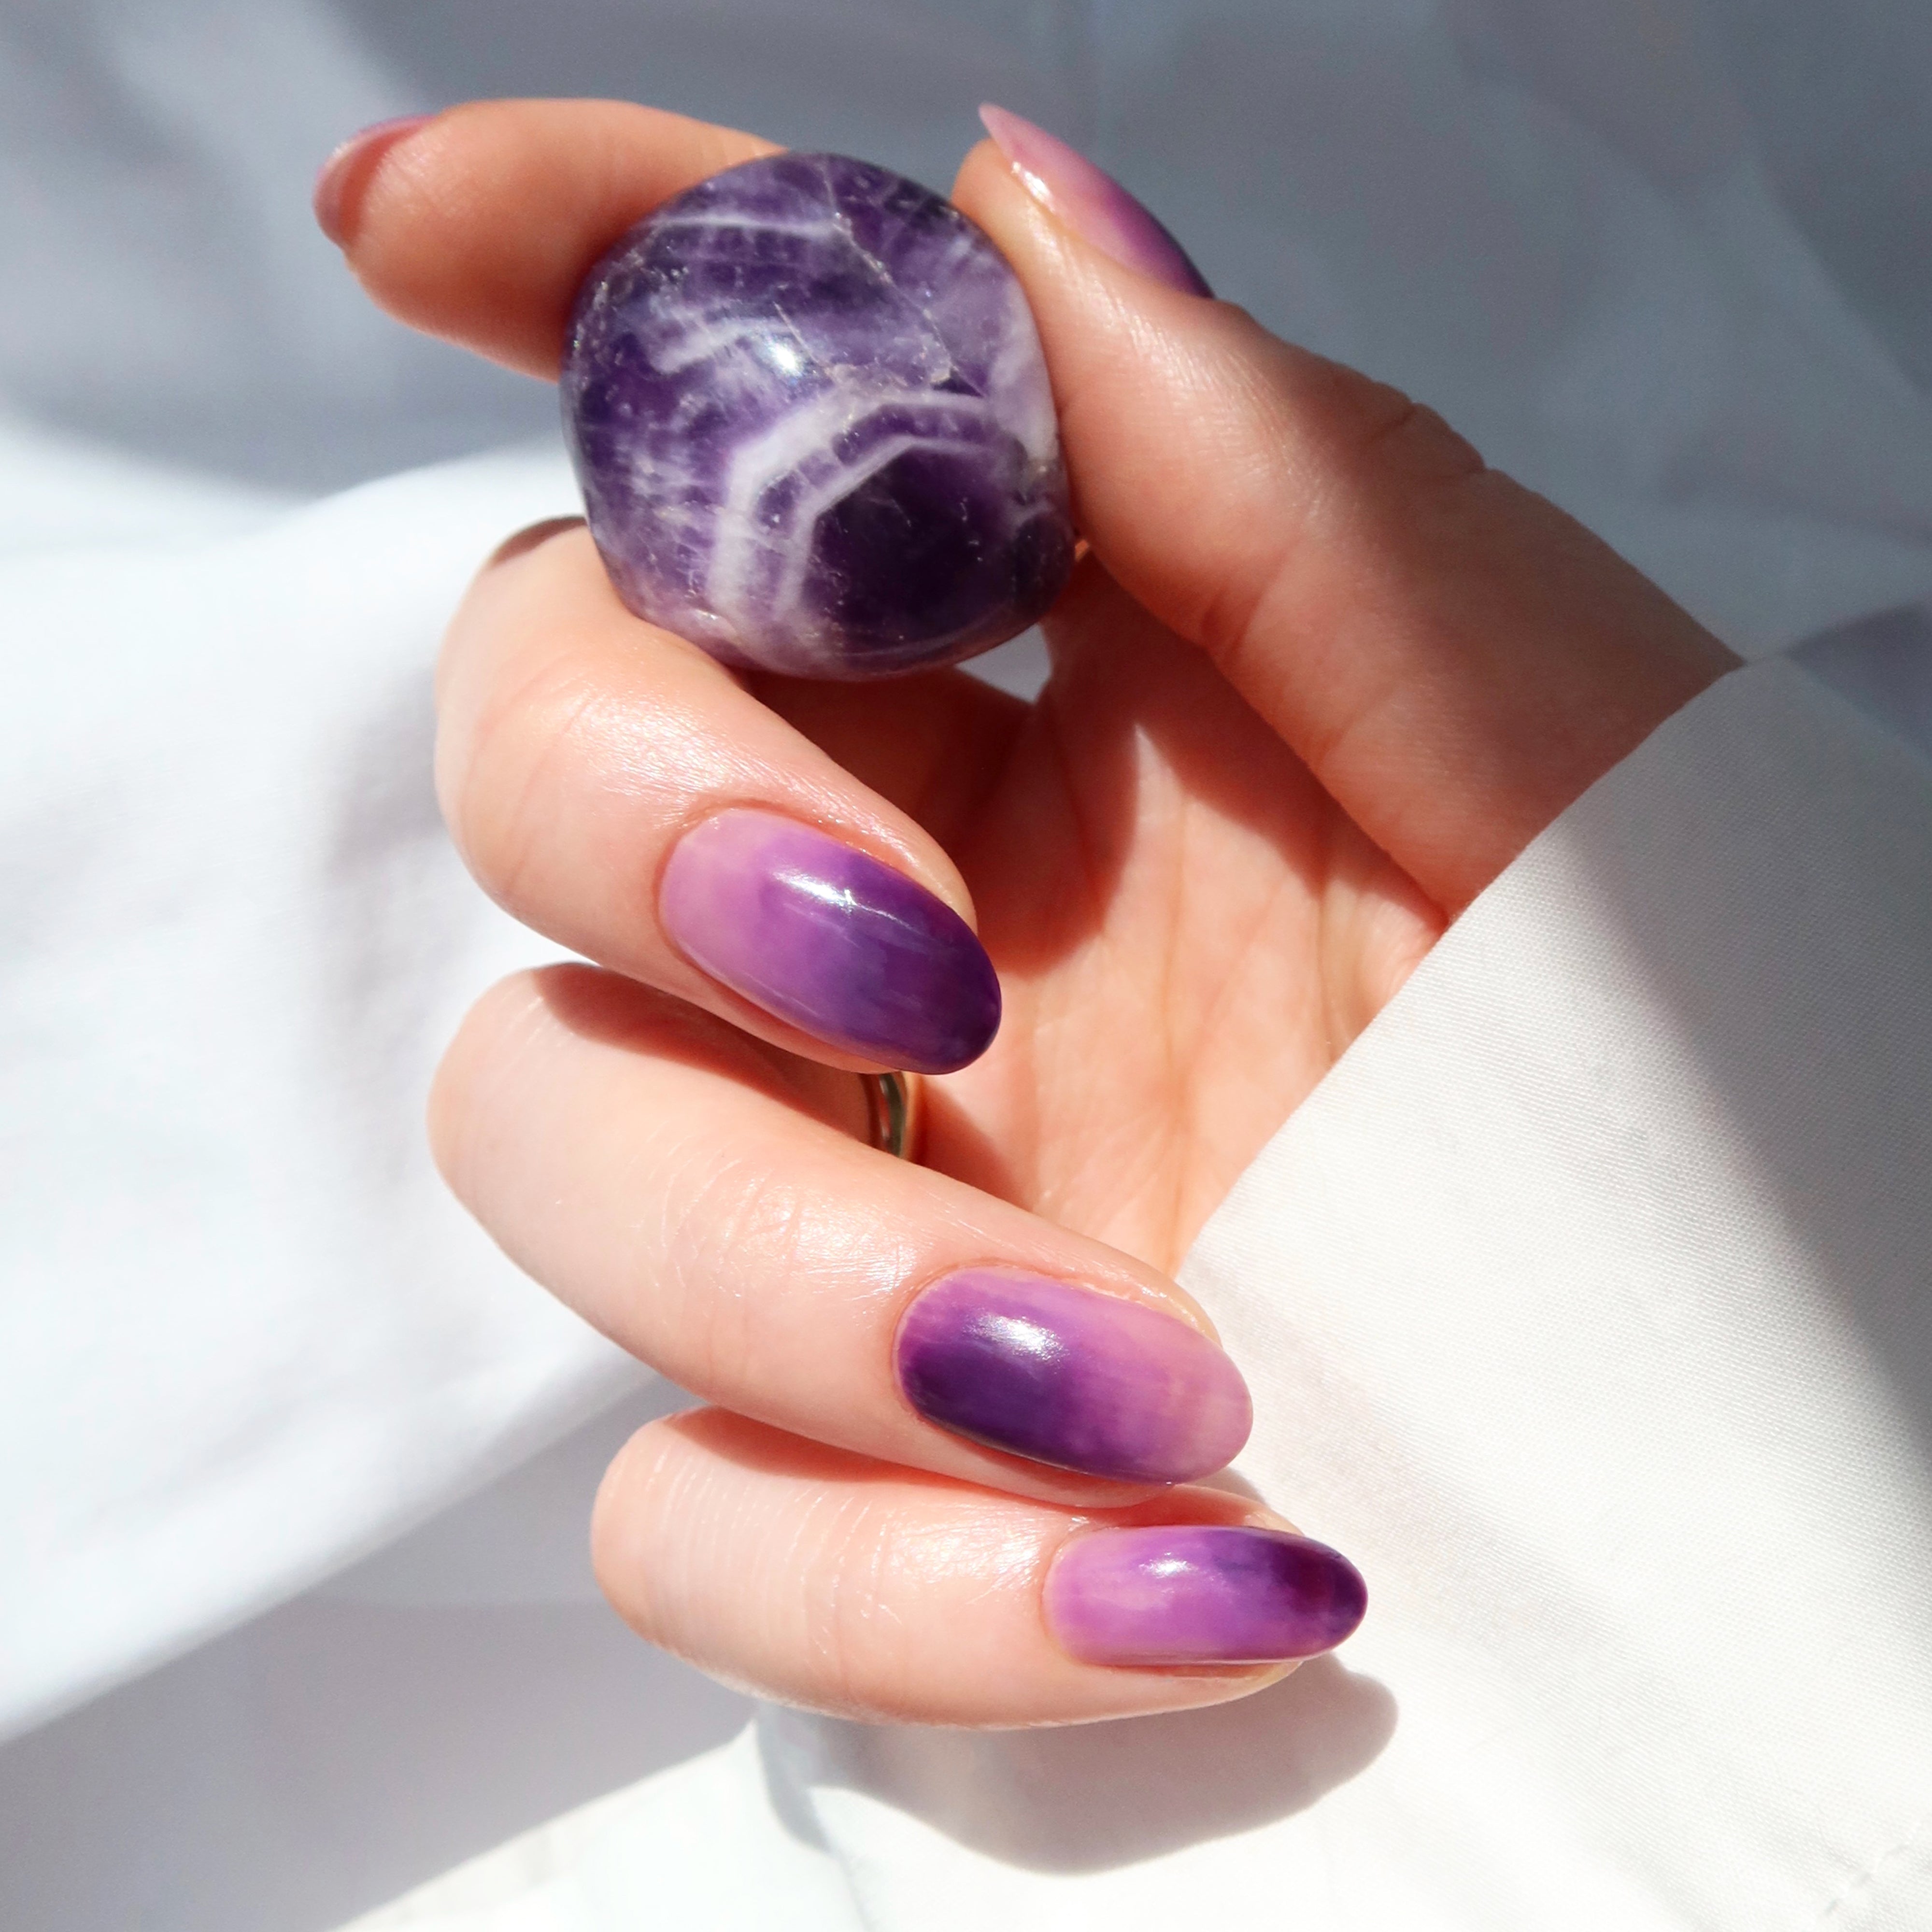 Amethyst Garden Nail Wraps Online Shop - Lily and Fox - Lily and Fox USA